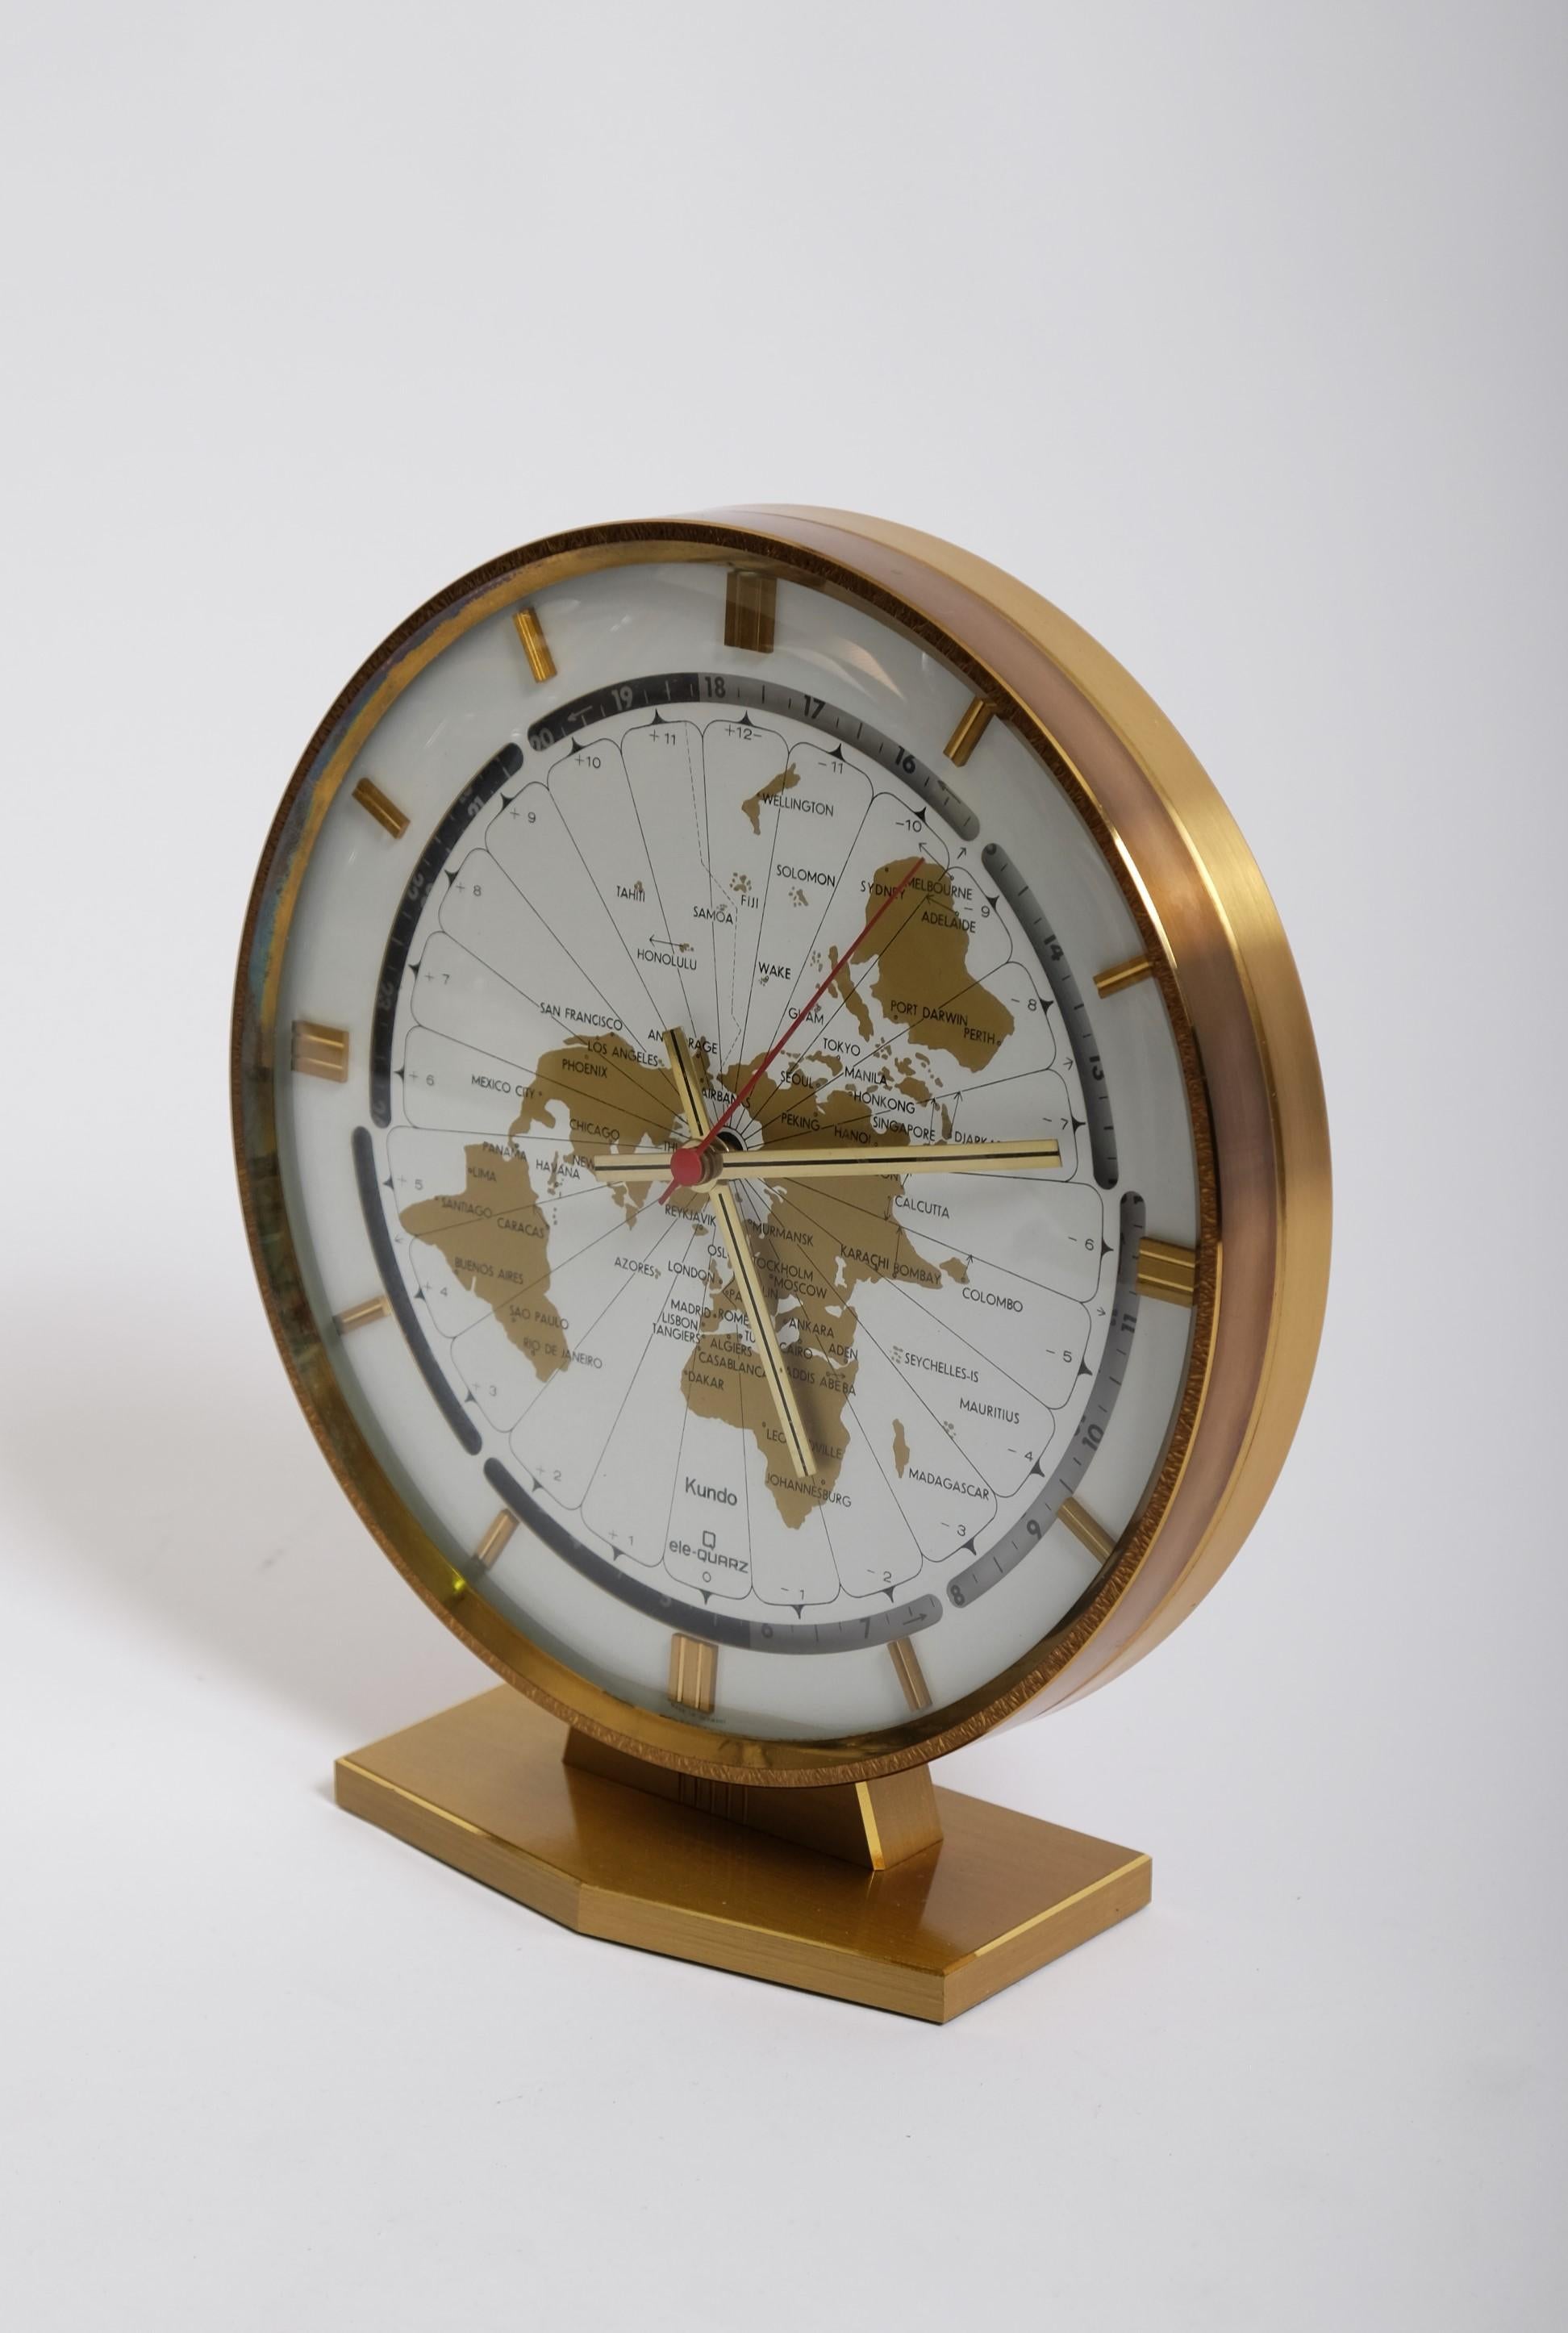 Late 20th Century Large Brass Table World Time Zone Clock by Kundo / Kieninger & Obergfell, 1970s For Sale